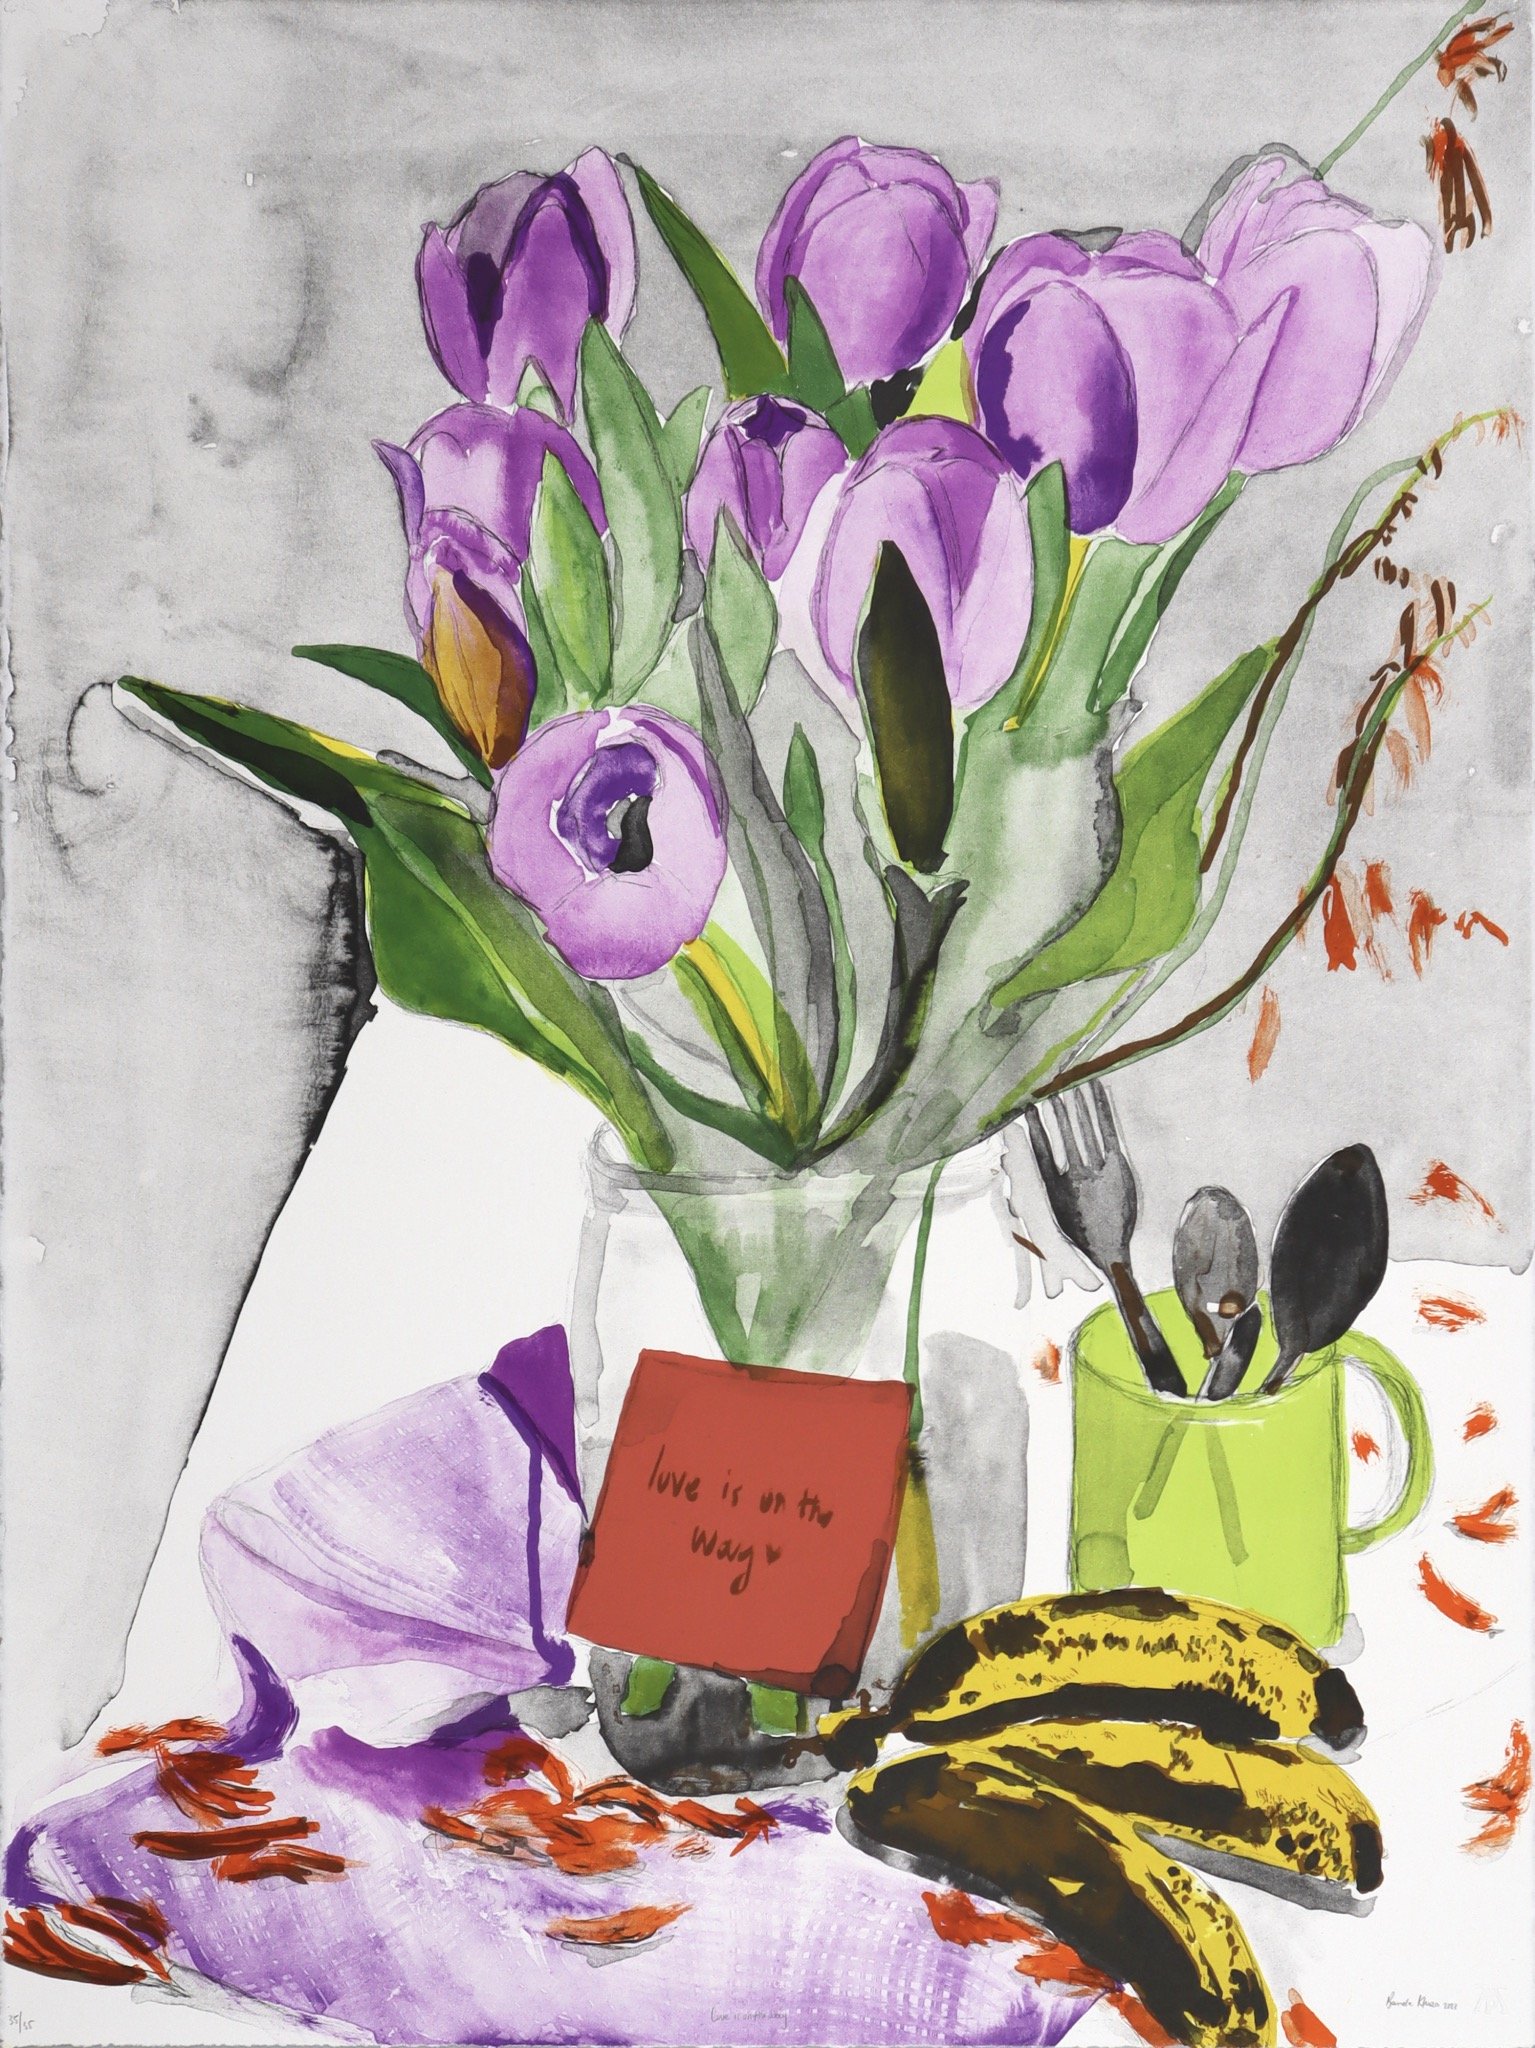 Banele lithograph of a green cup with lilac tulips in it